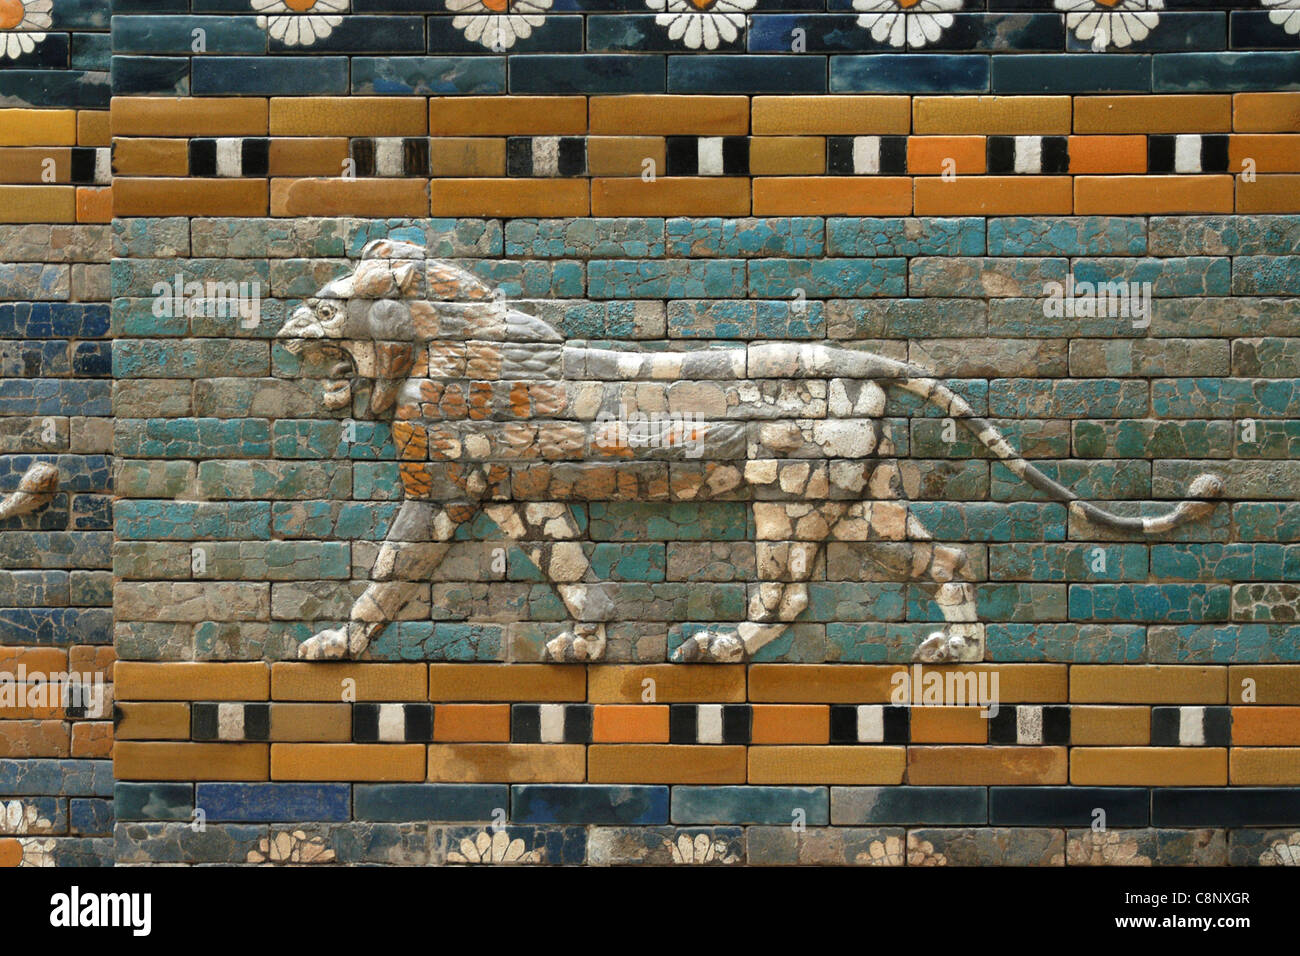 Lion. Glazed tiles from the Processional Way from Babylon in the Pergamon Museum in Berlin, Germany. Stock Photo